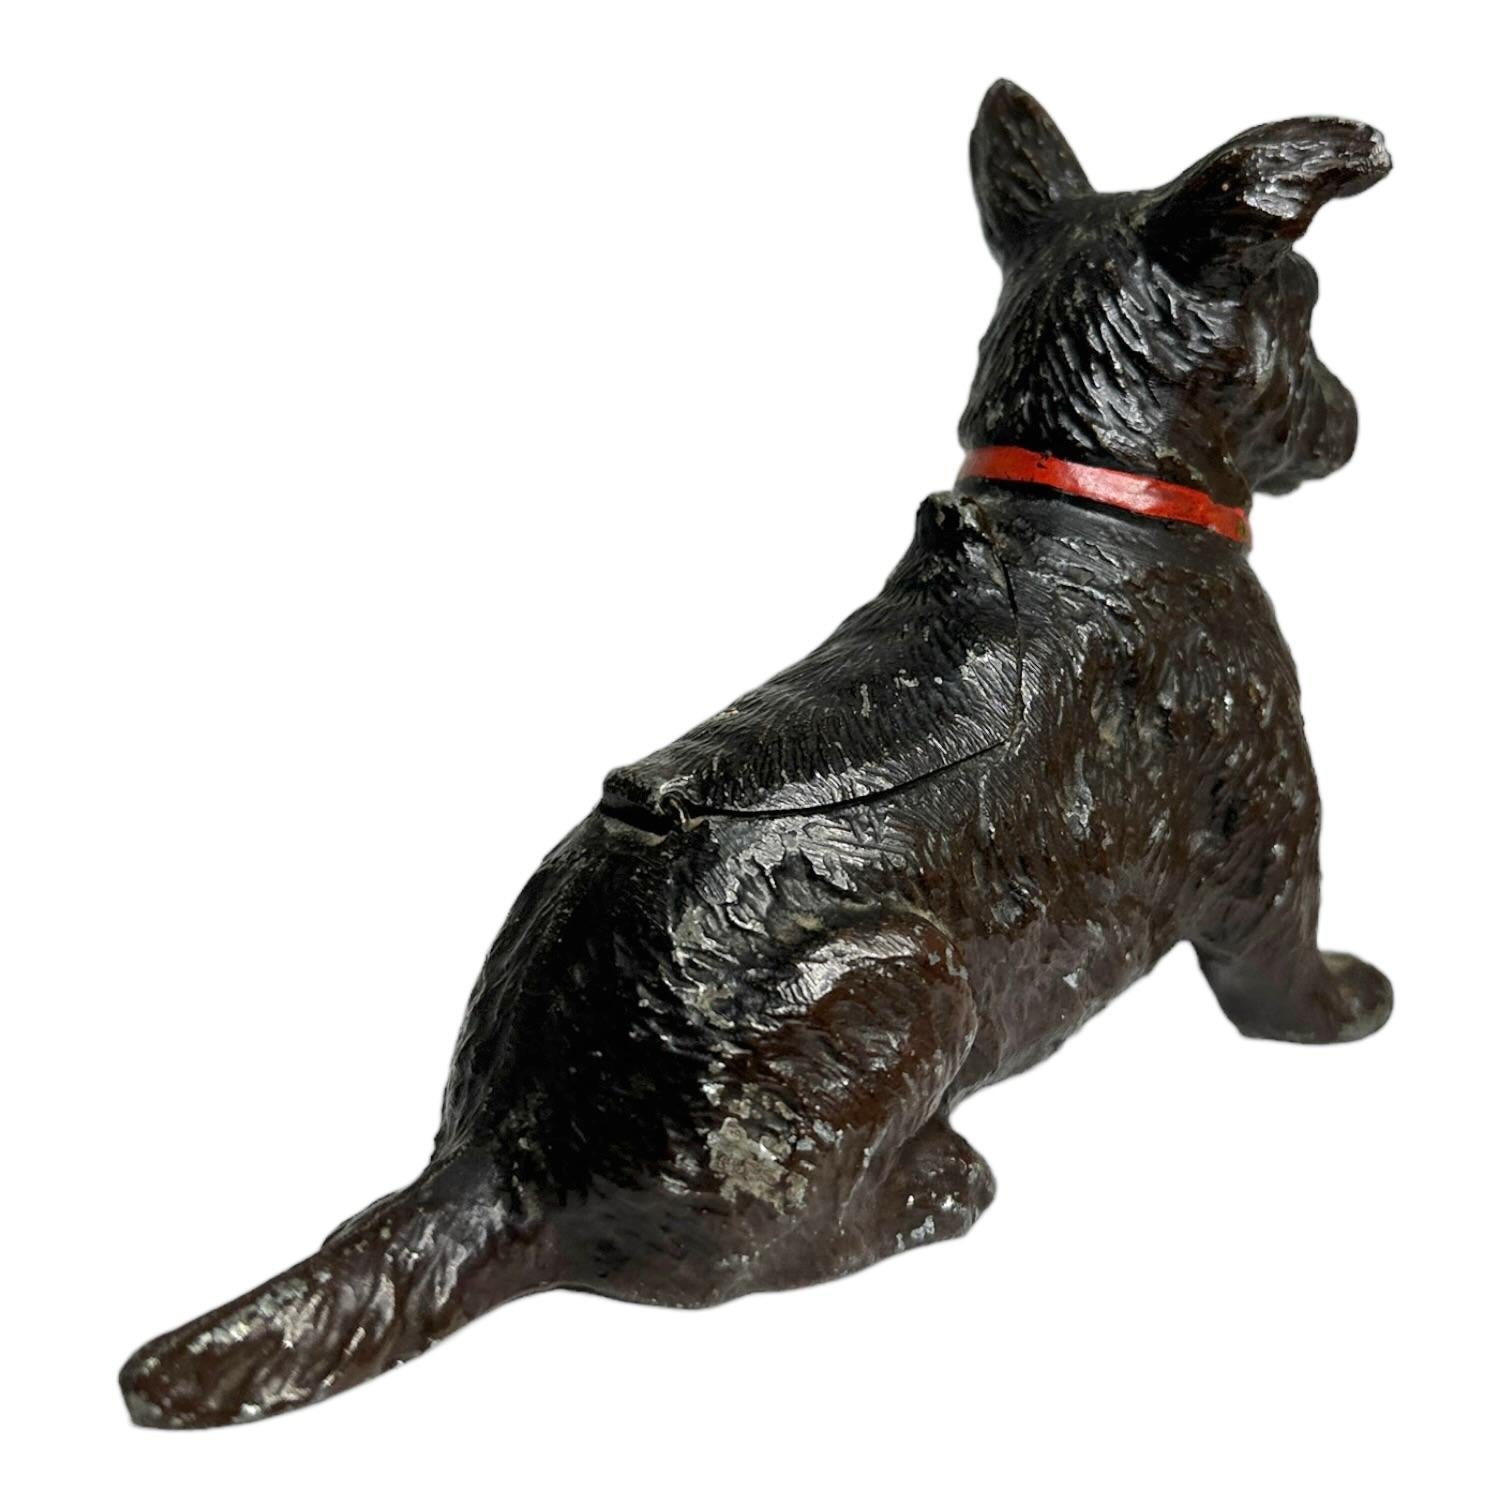 Classic early 1910s Desk Catchall figurine. This polychromed cold painted metal is probably something you need if you’re a Vienna bronze or a dog figure collector. Also nice as a gift for a mom or dad of a Scotty dog. Found at an estate sale in